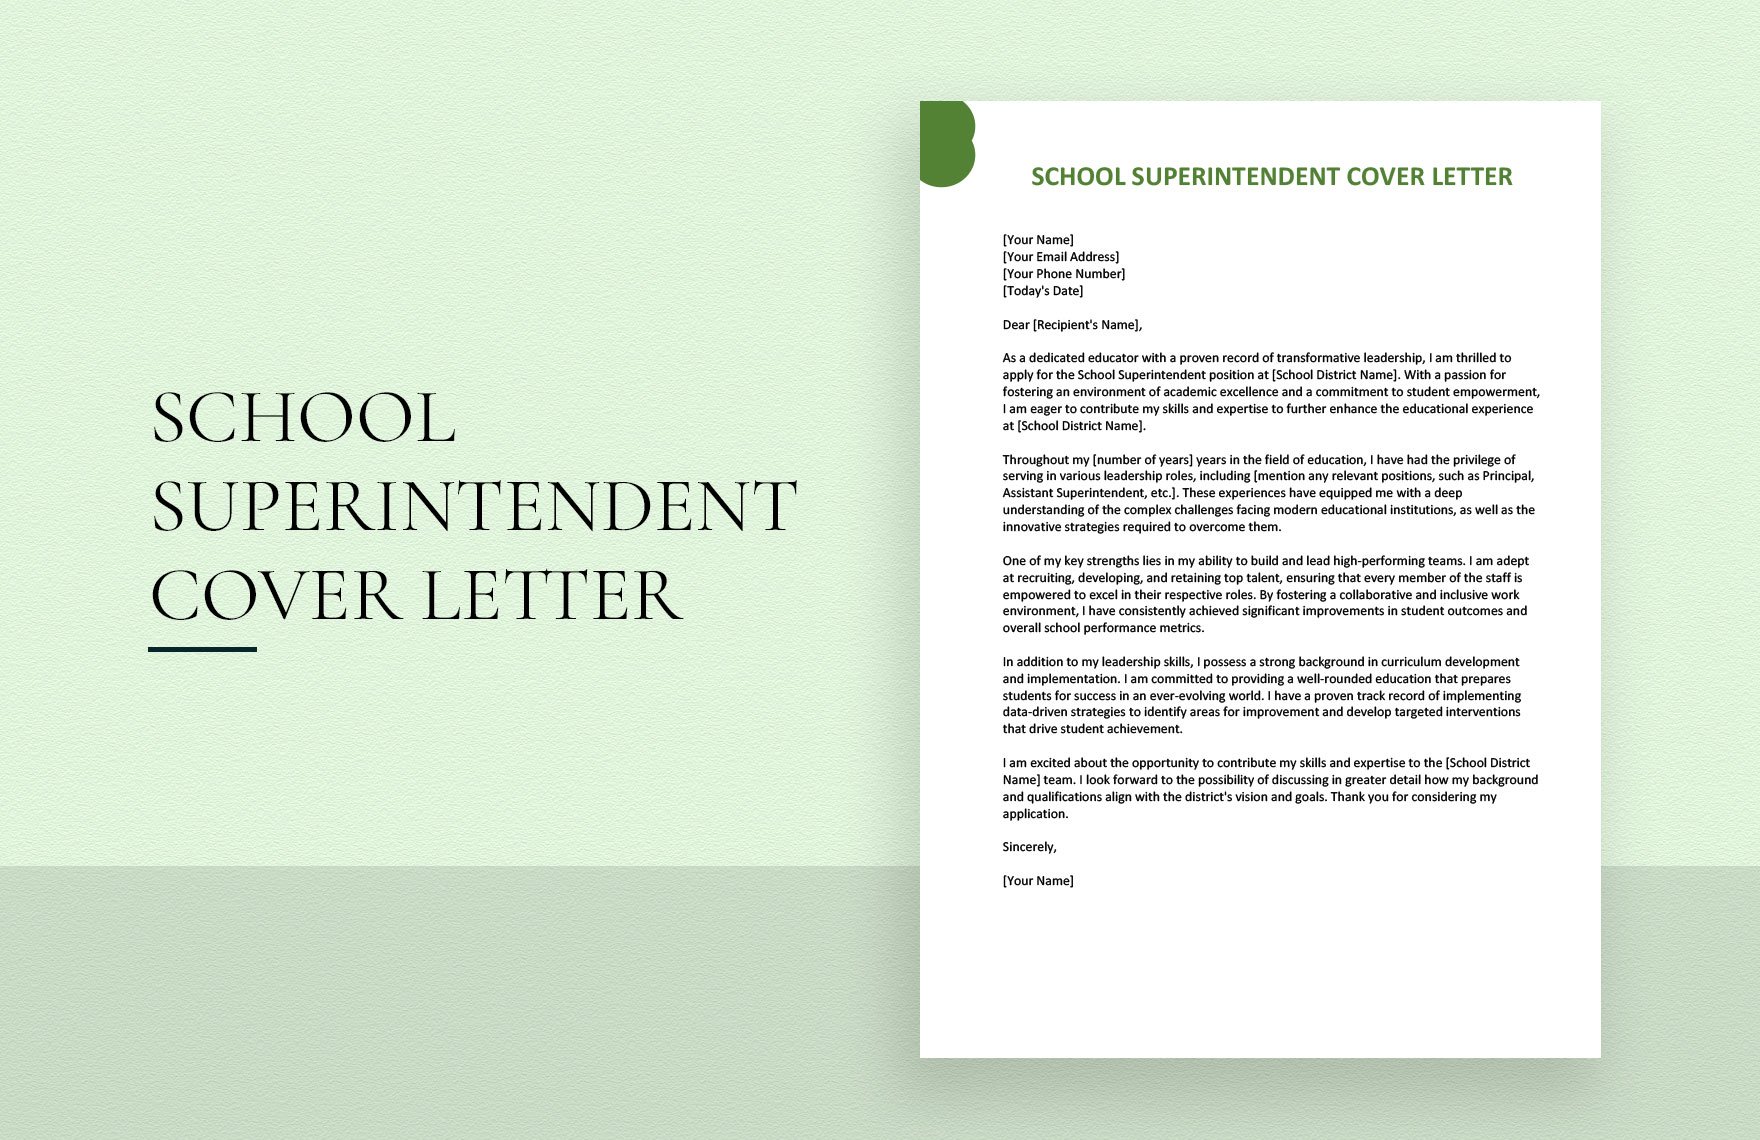 School Superintendent Cover Letter in Word, Google Docs